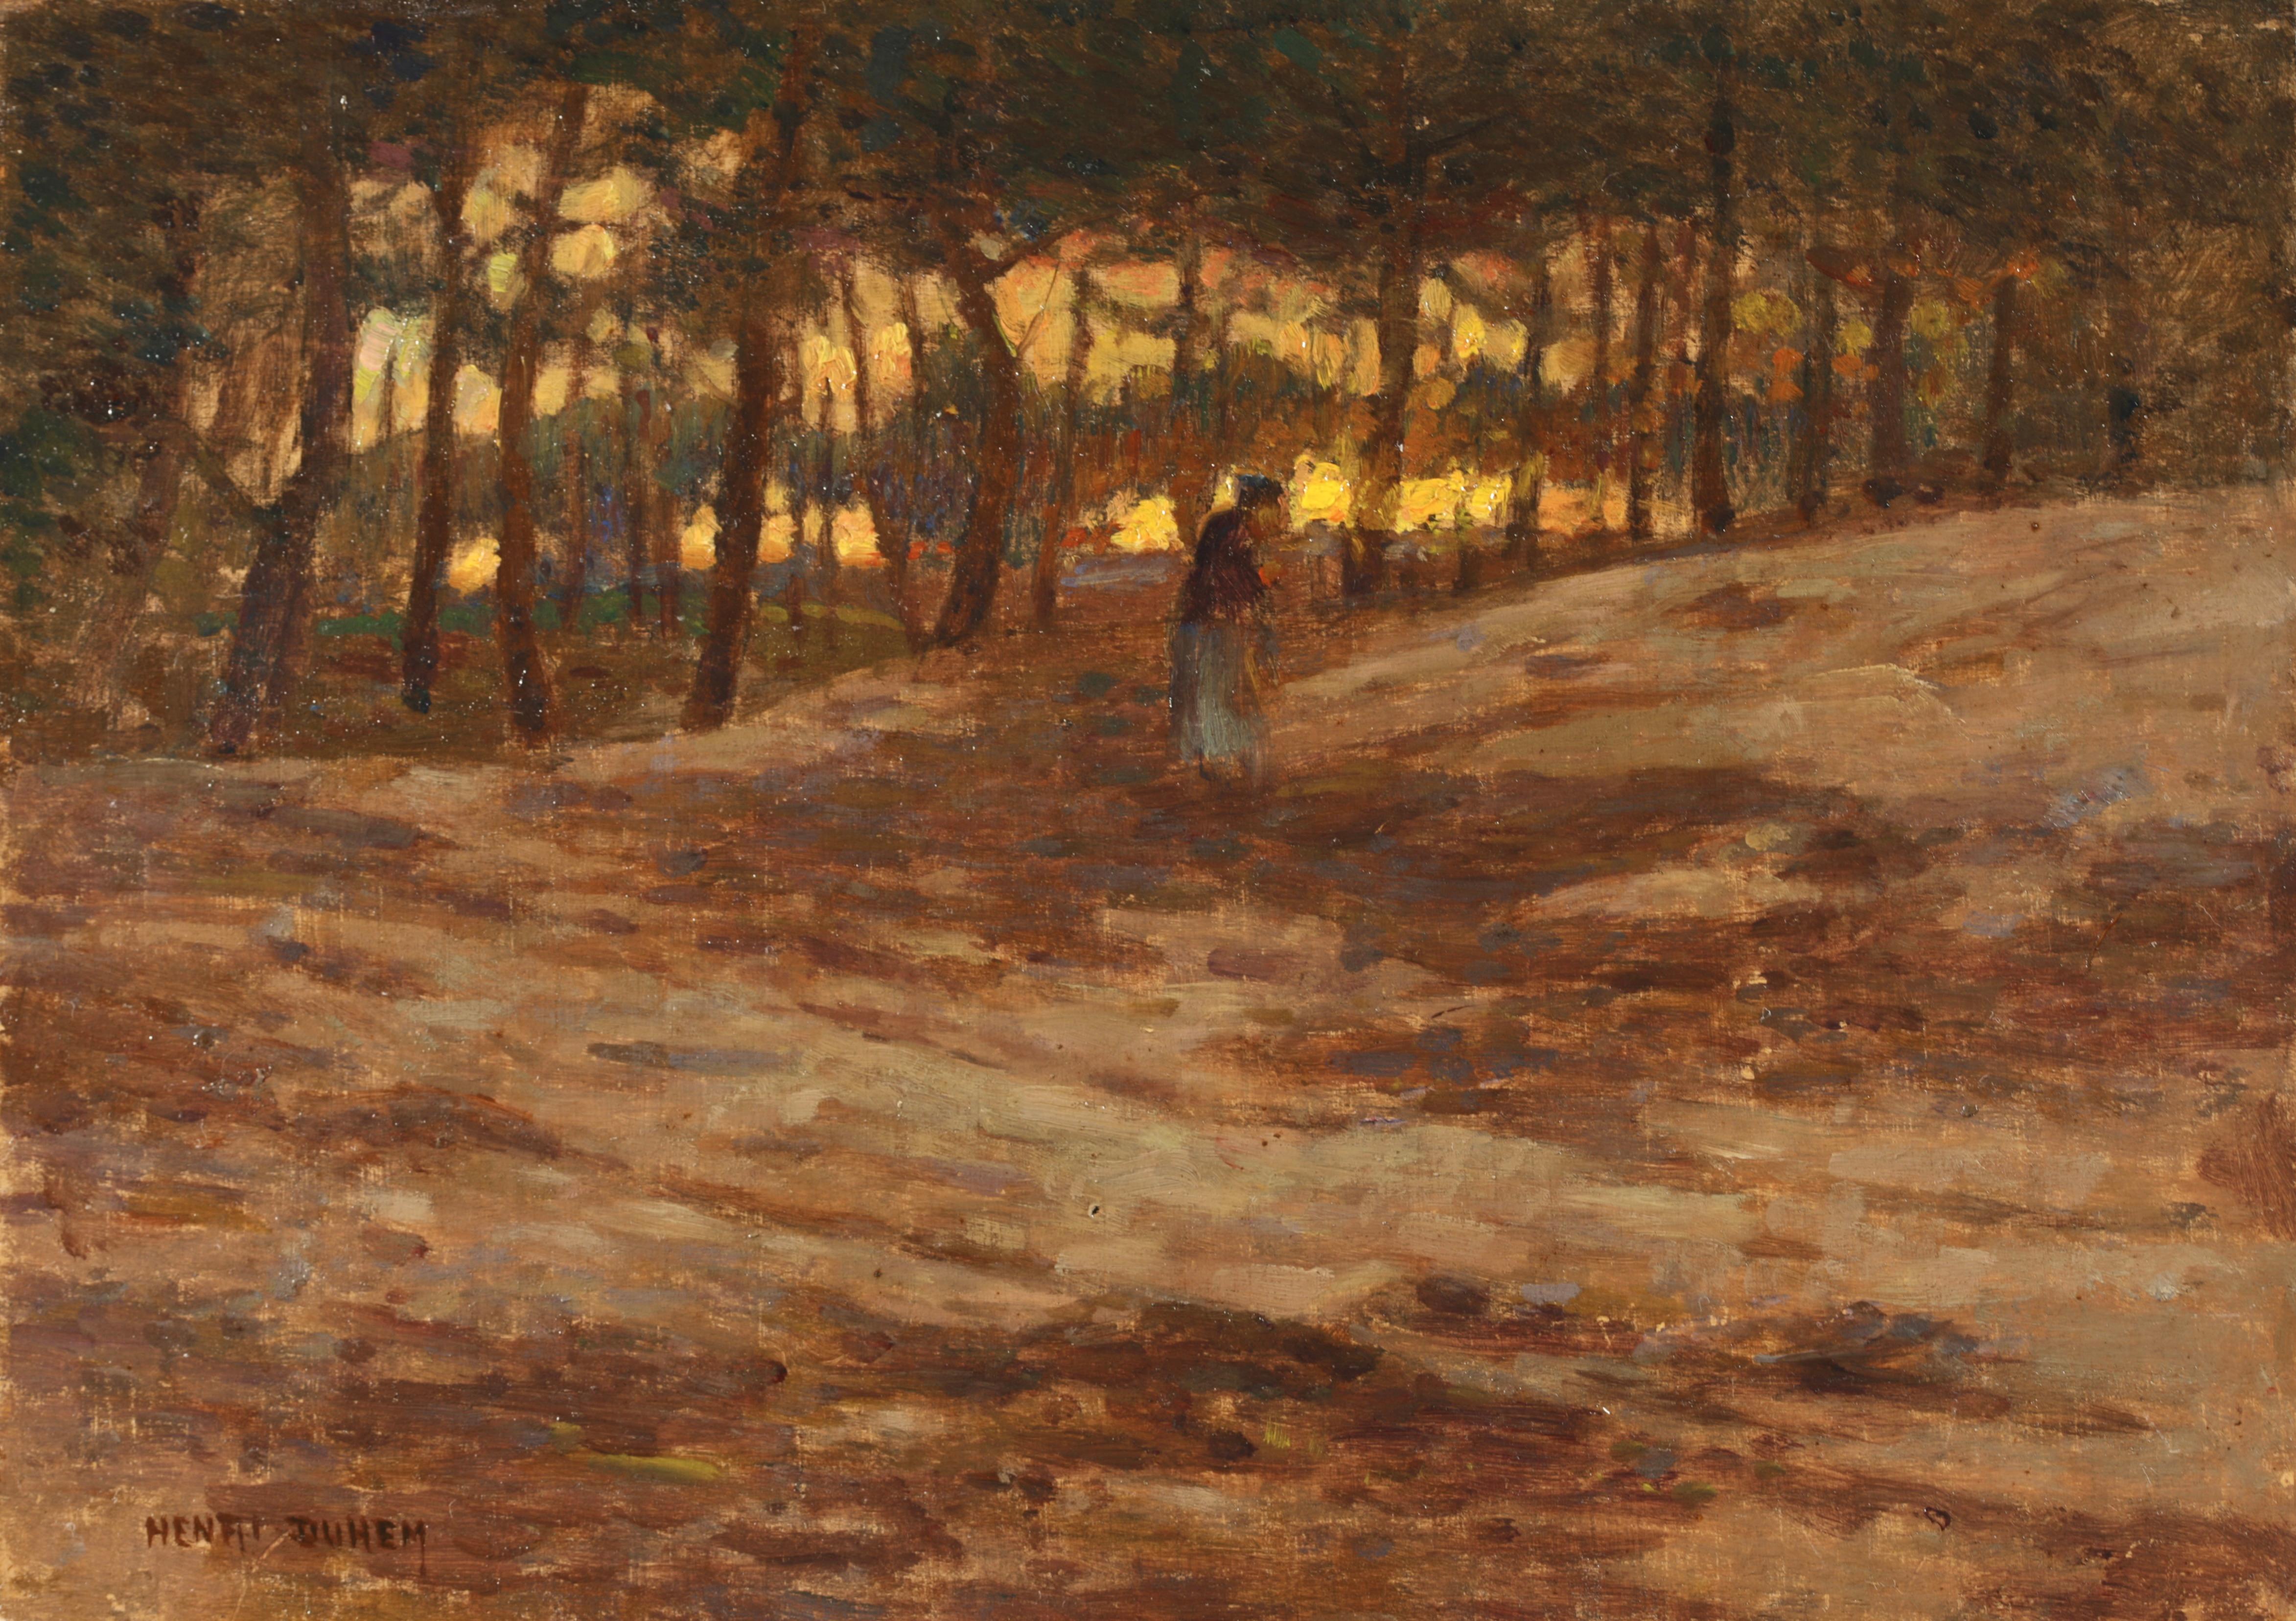 Impressionist signed and dated landscape oil on panel by French painter Henri Duhem. The work depicts a woman walking through a forest as the sun sets in oranges and yellows behind the trees. 

Signature:
Signed lower left and dated 1898